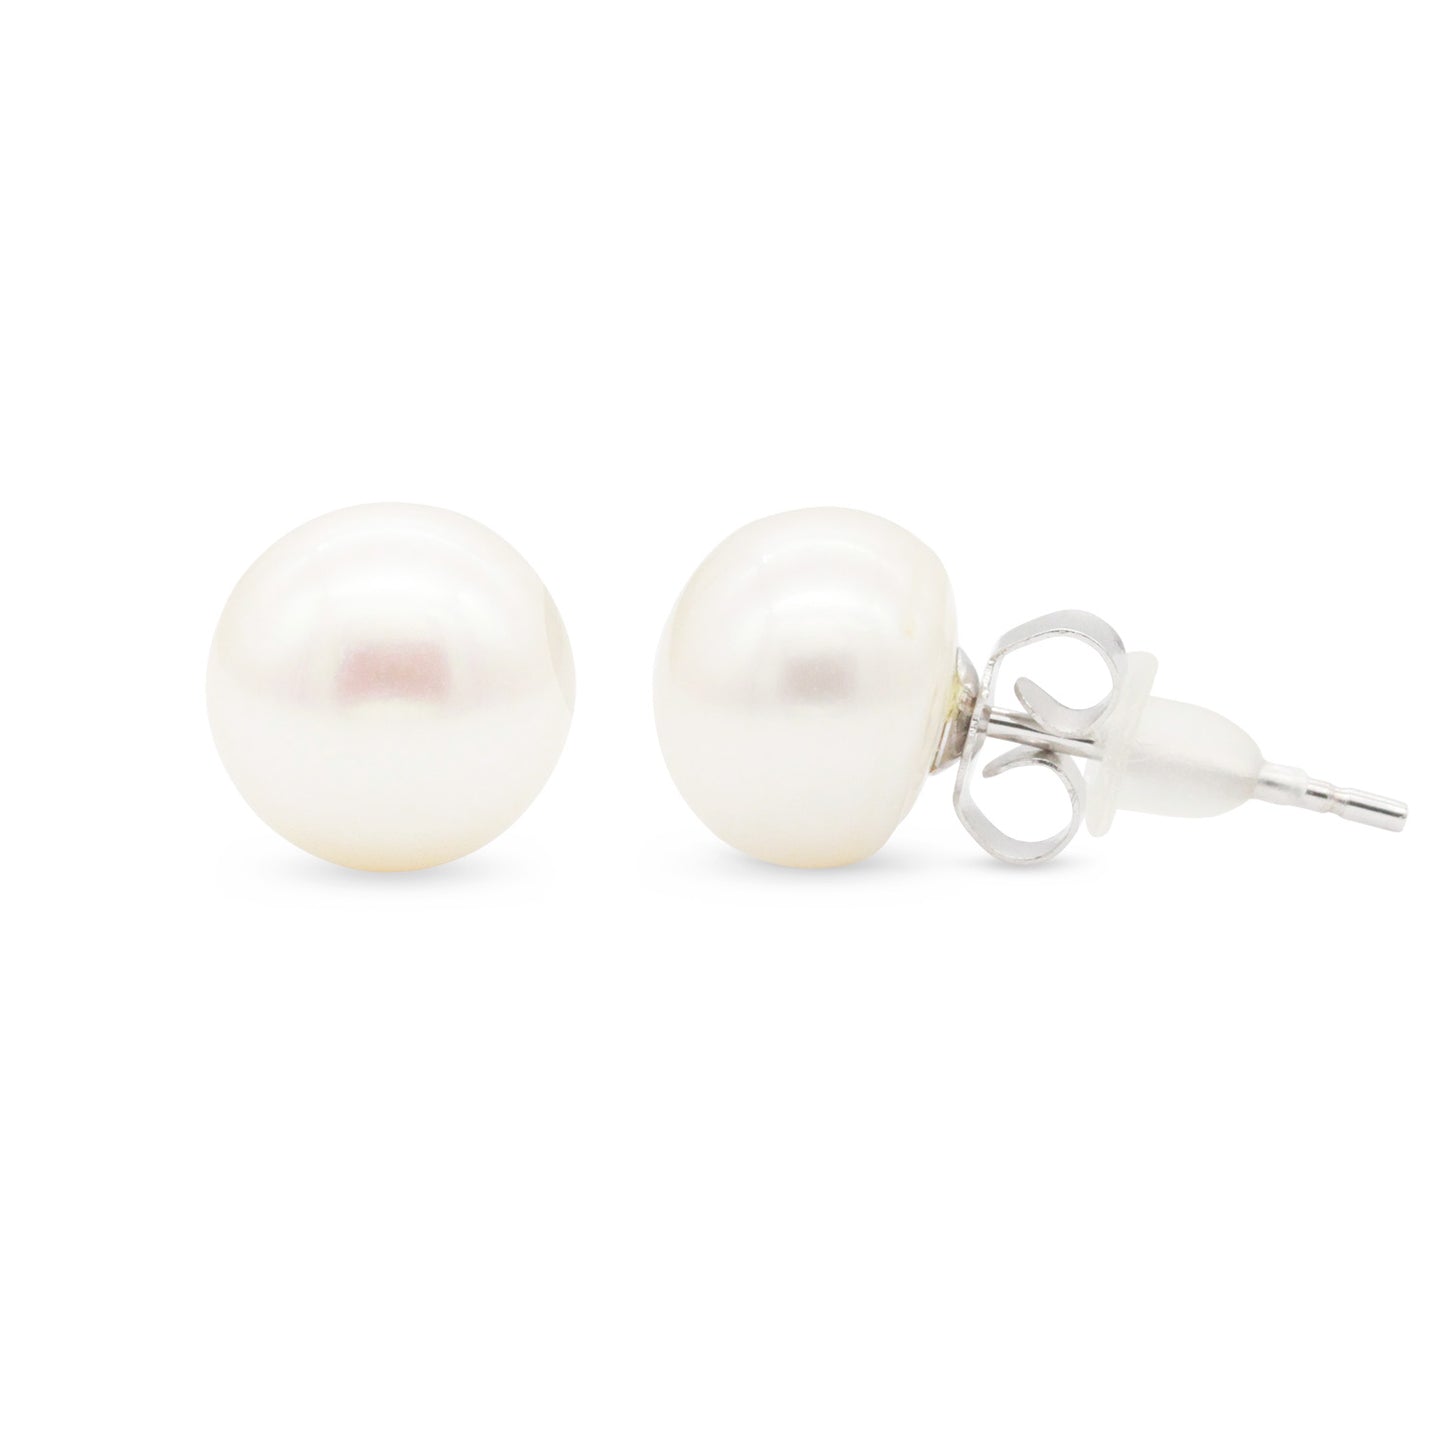 Genuine Freshwater Pearl Strand Necklace with Pearl Stud Earrings - 18 in Long